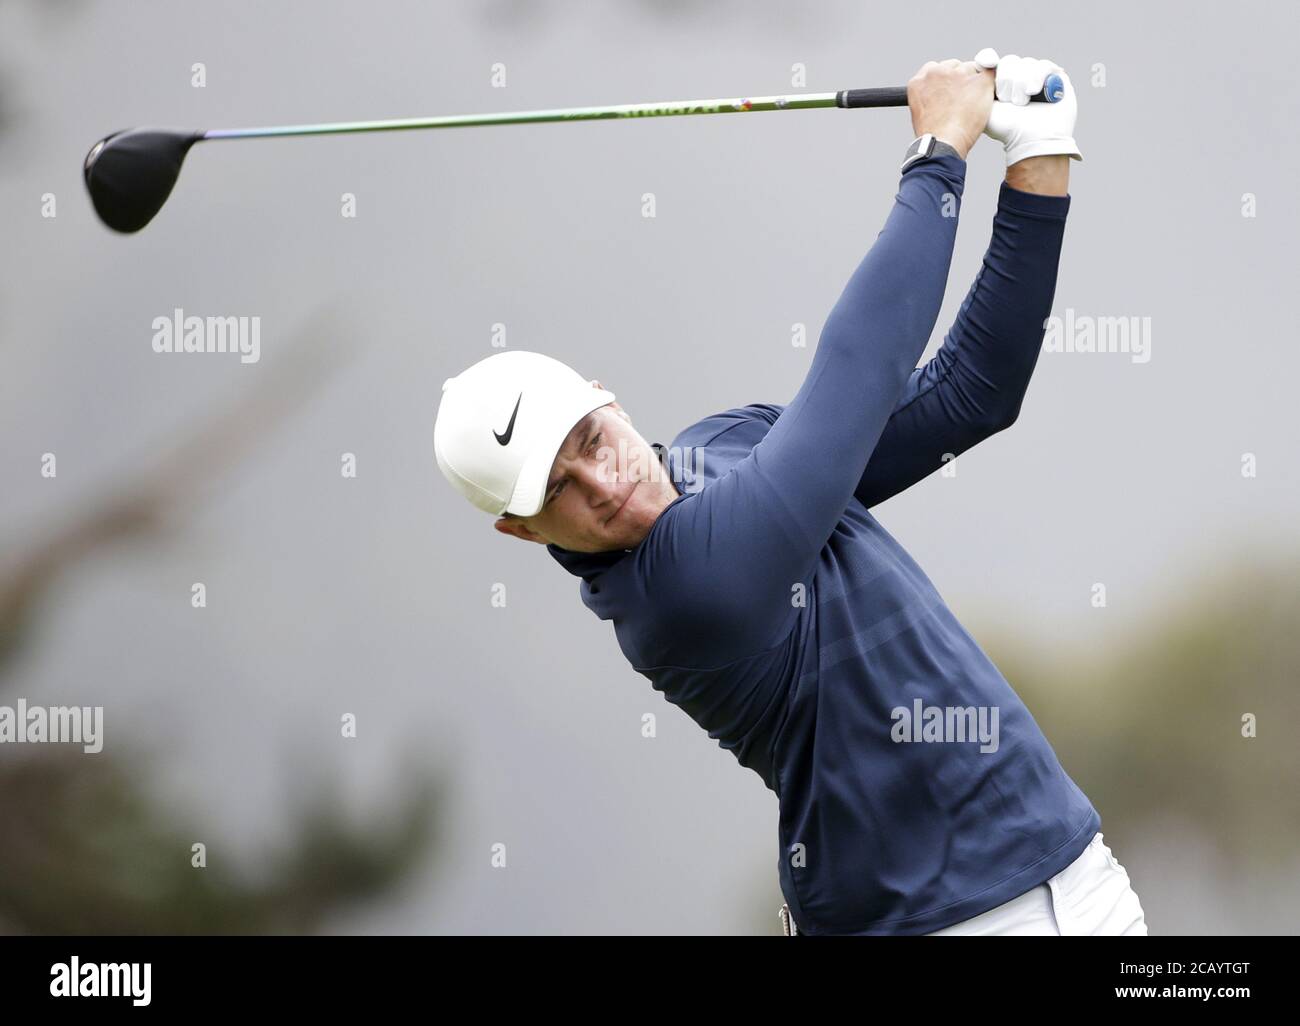 San Francisco, United States. 09th Aug, 2020. Cameron Champ hits his tee shot on the 4th hole in the final round of the 102nd PGA Championship at TPC Harding Park in San Francisco on Sunday, August 9, 2020. Photo by John Angelillo/UPI Credit: UPI/Alamy Live News Stock Photo